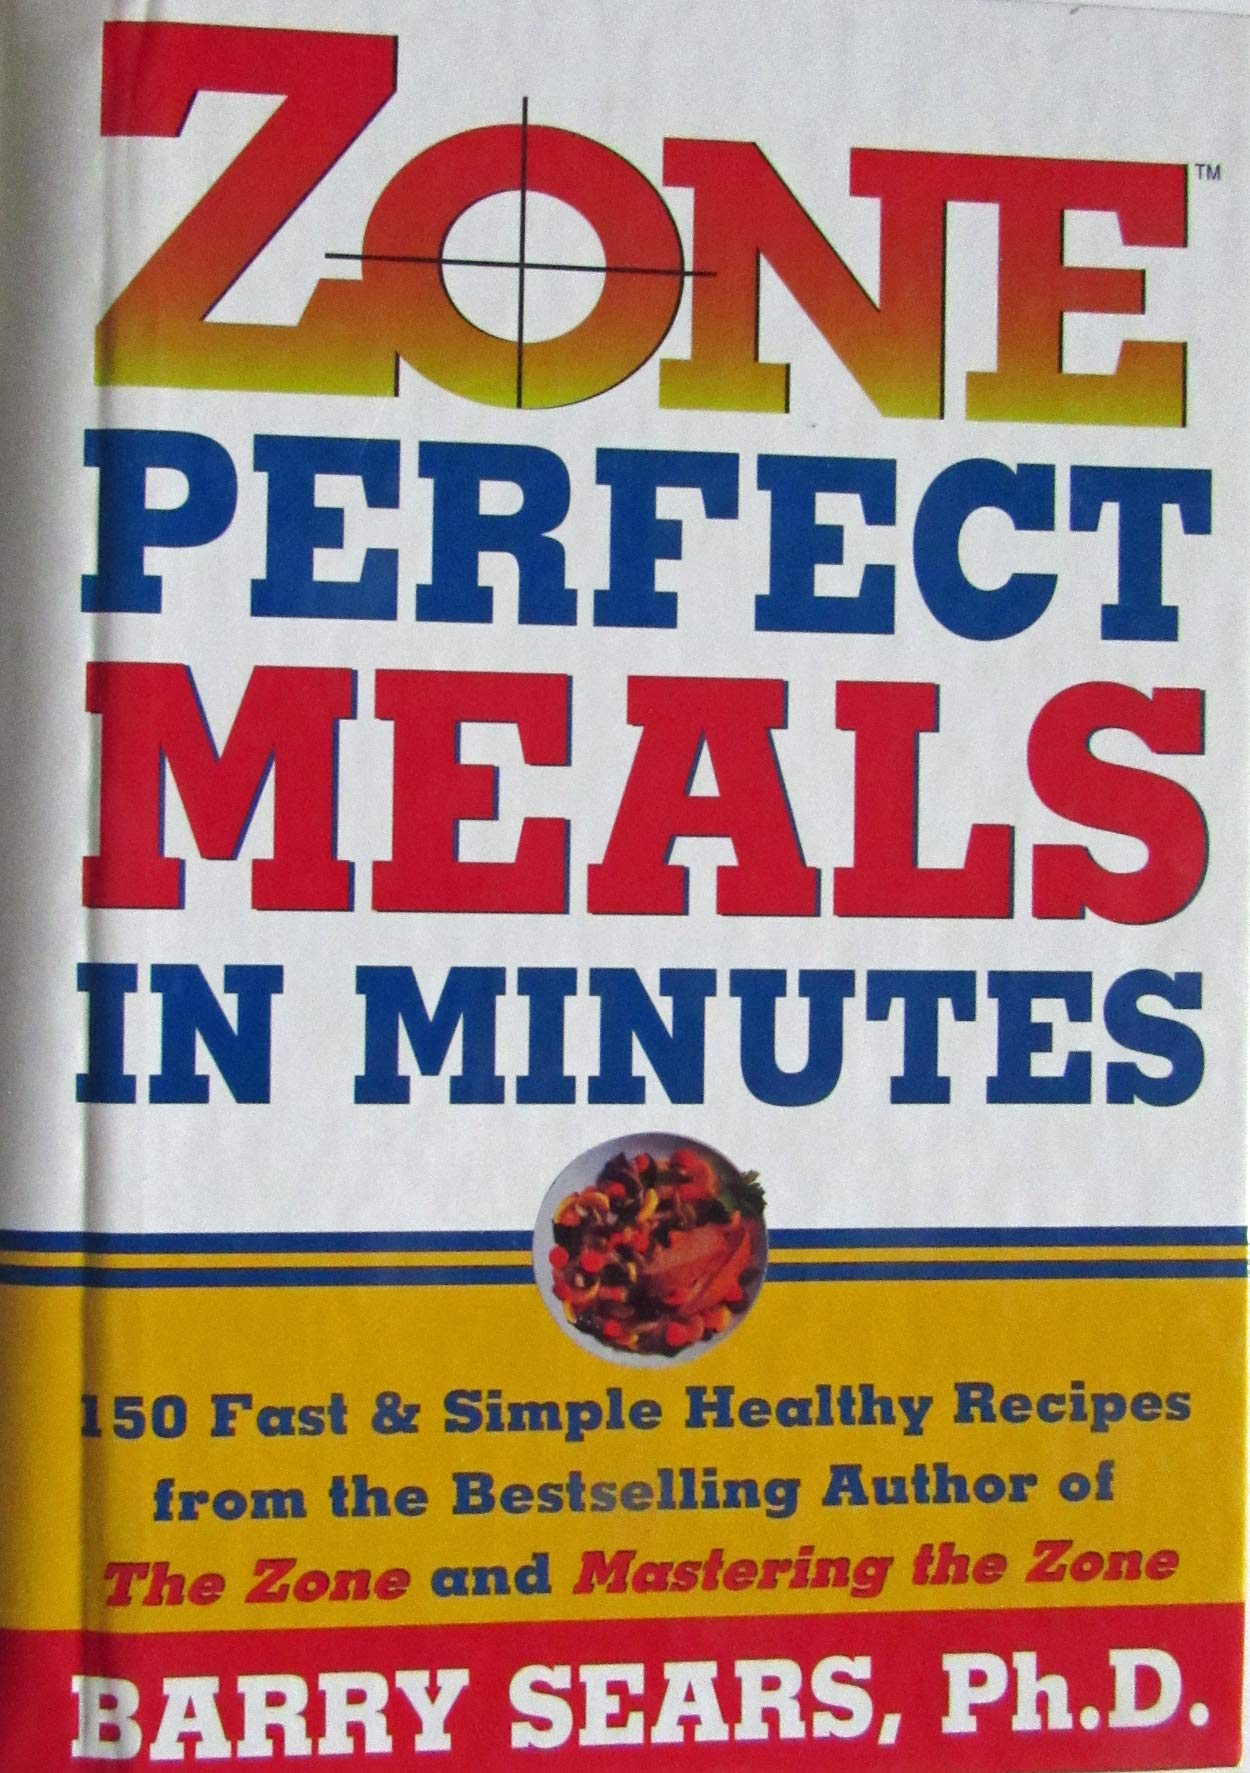 *Sale* Zone Perfect Meals In Minutes (Barry Sears, Ph.D)